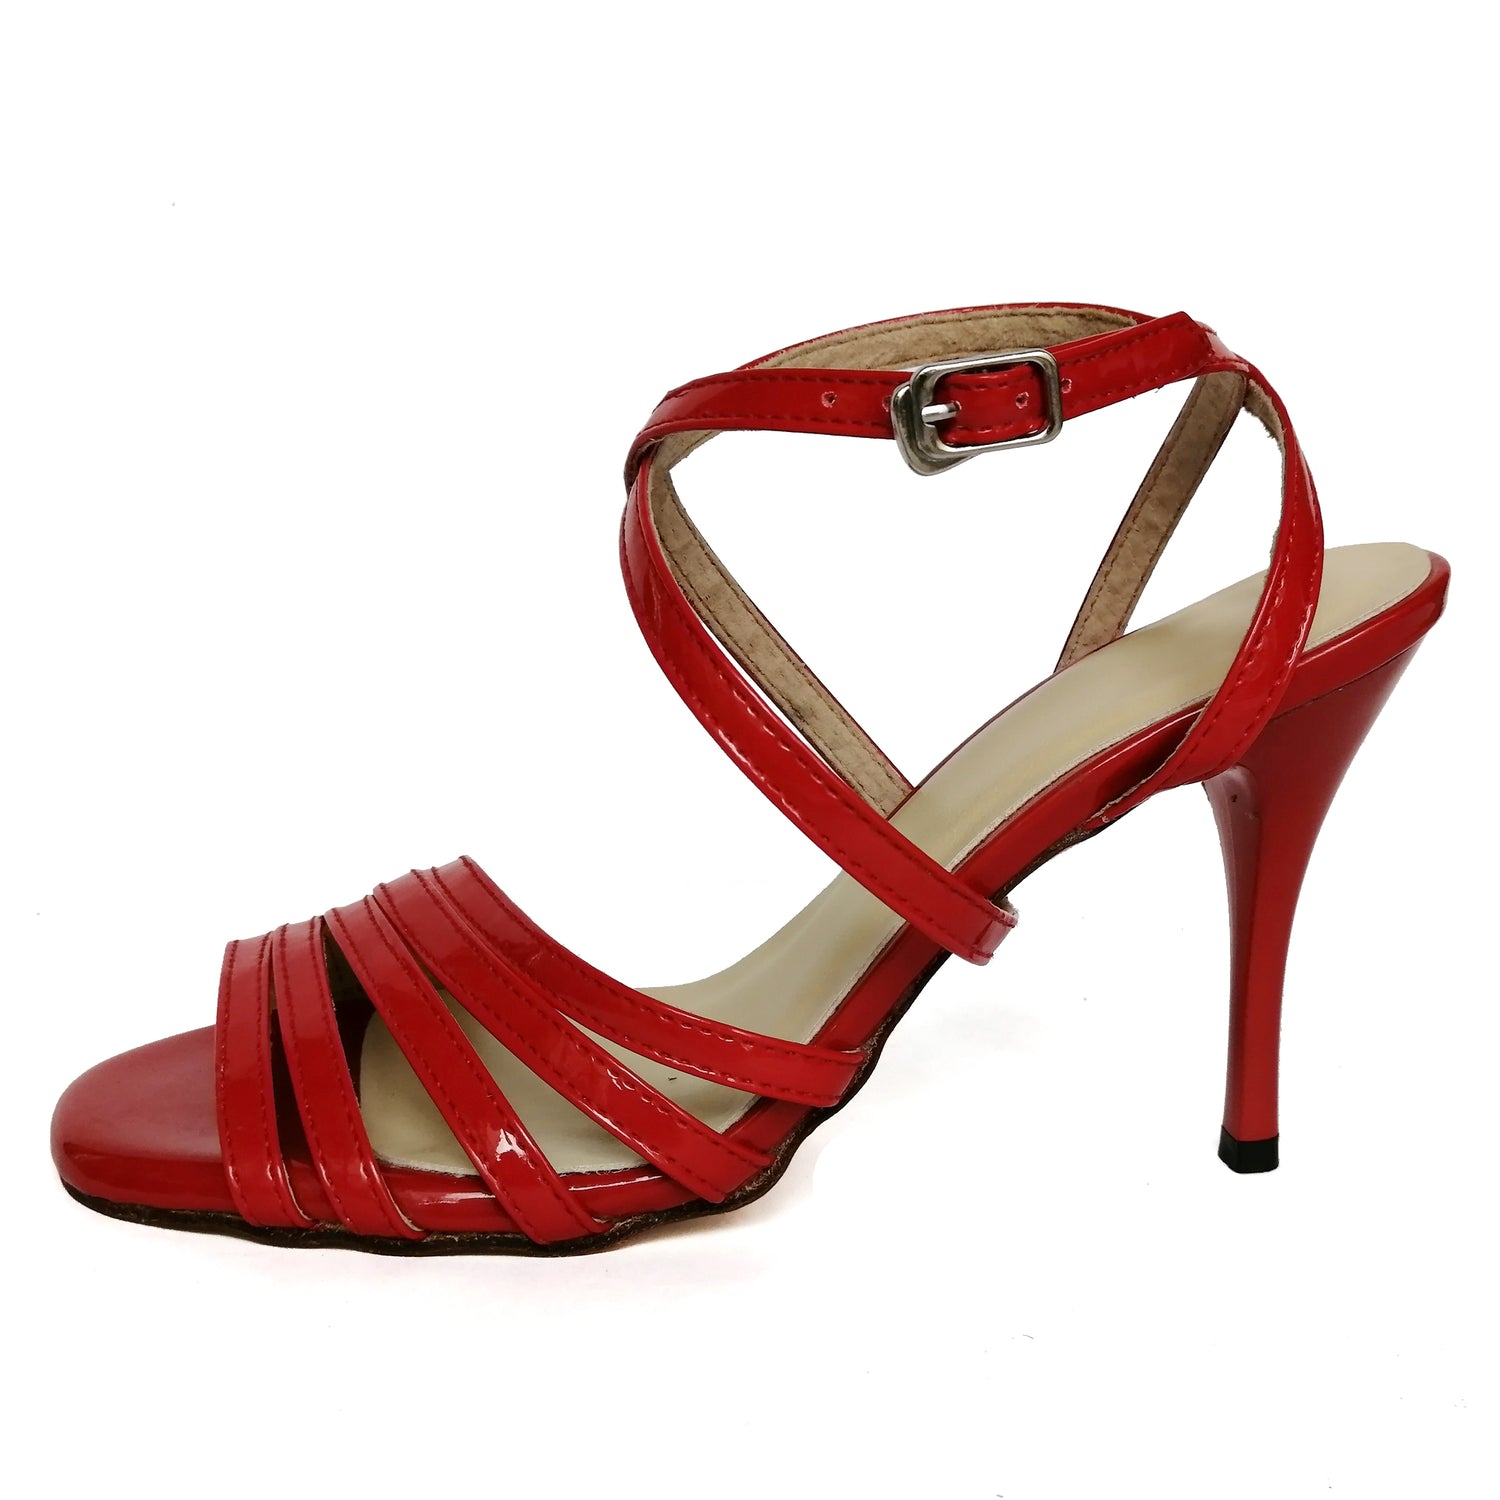 Pro Dancer Women's Argentine Tango Shoes High Heel Dance Sandals with Leather Sole in Red (PD9022A)3